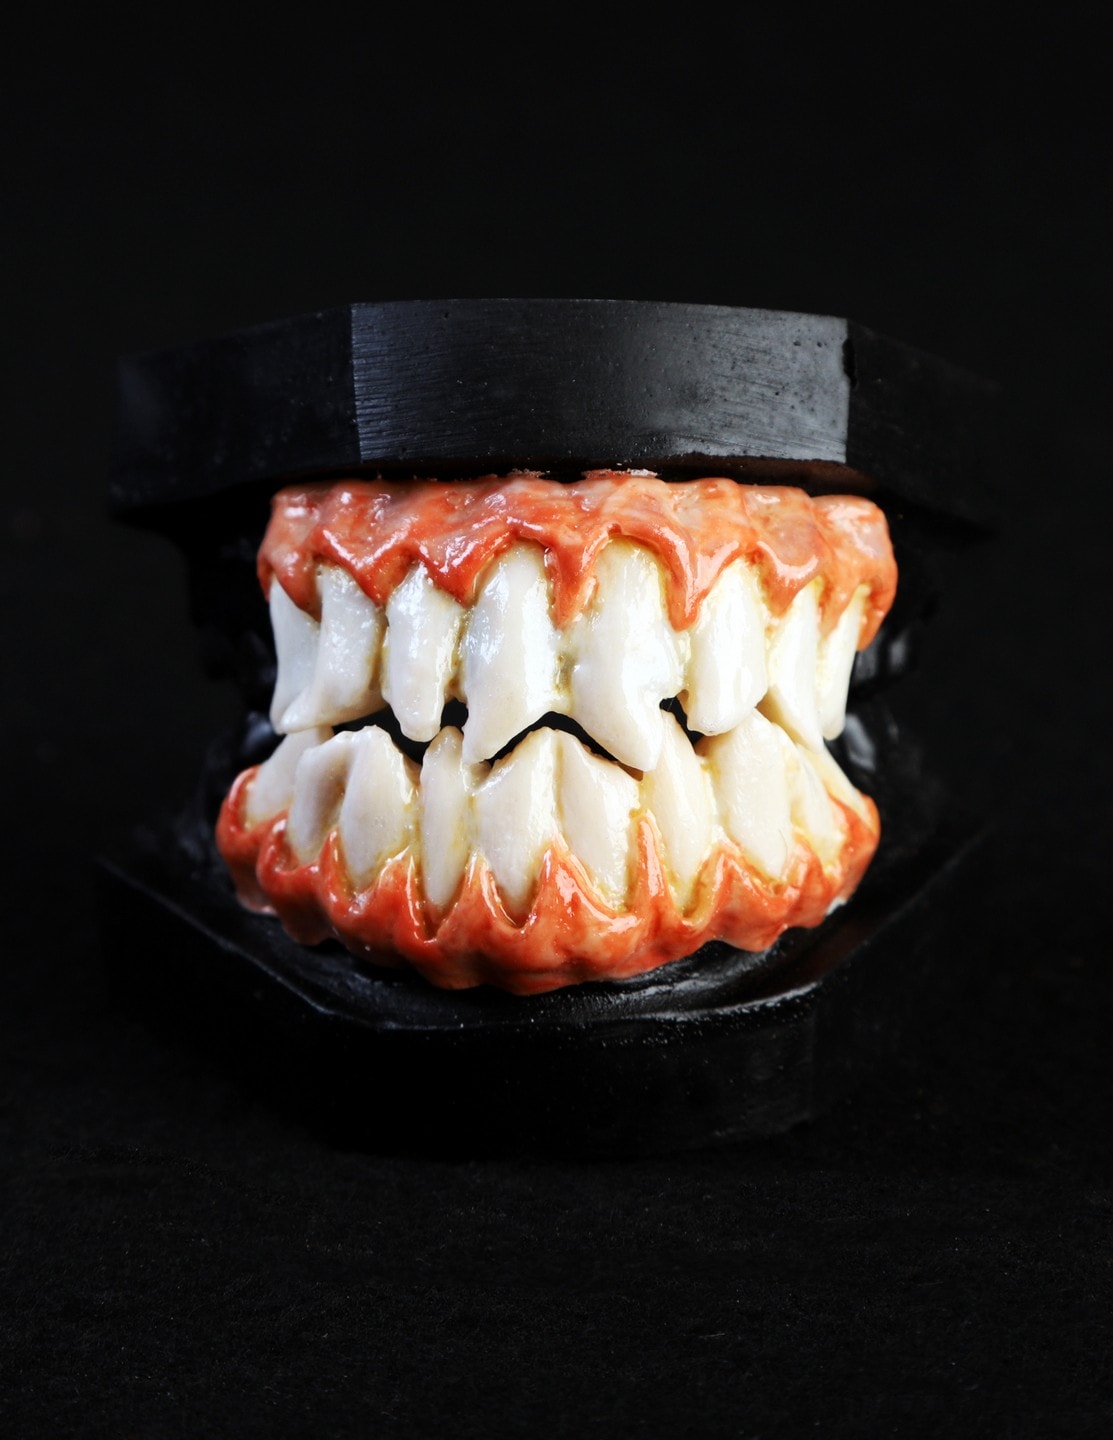 Close-up image of a model of sharp monster teeth and red gums.